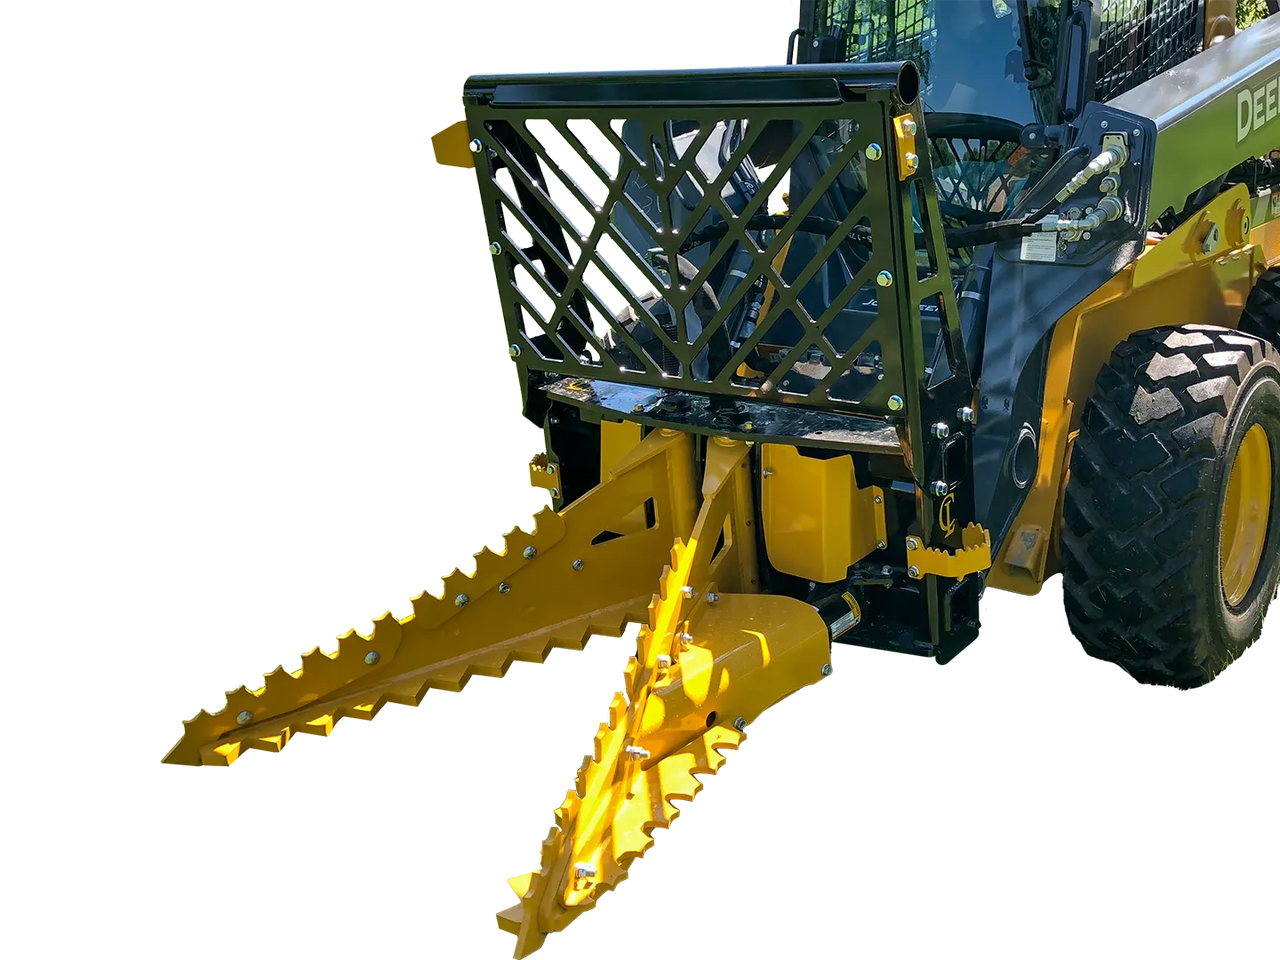 Dominator Tree Puller with 31" Cab Guard